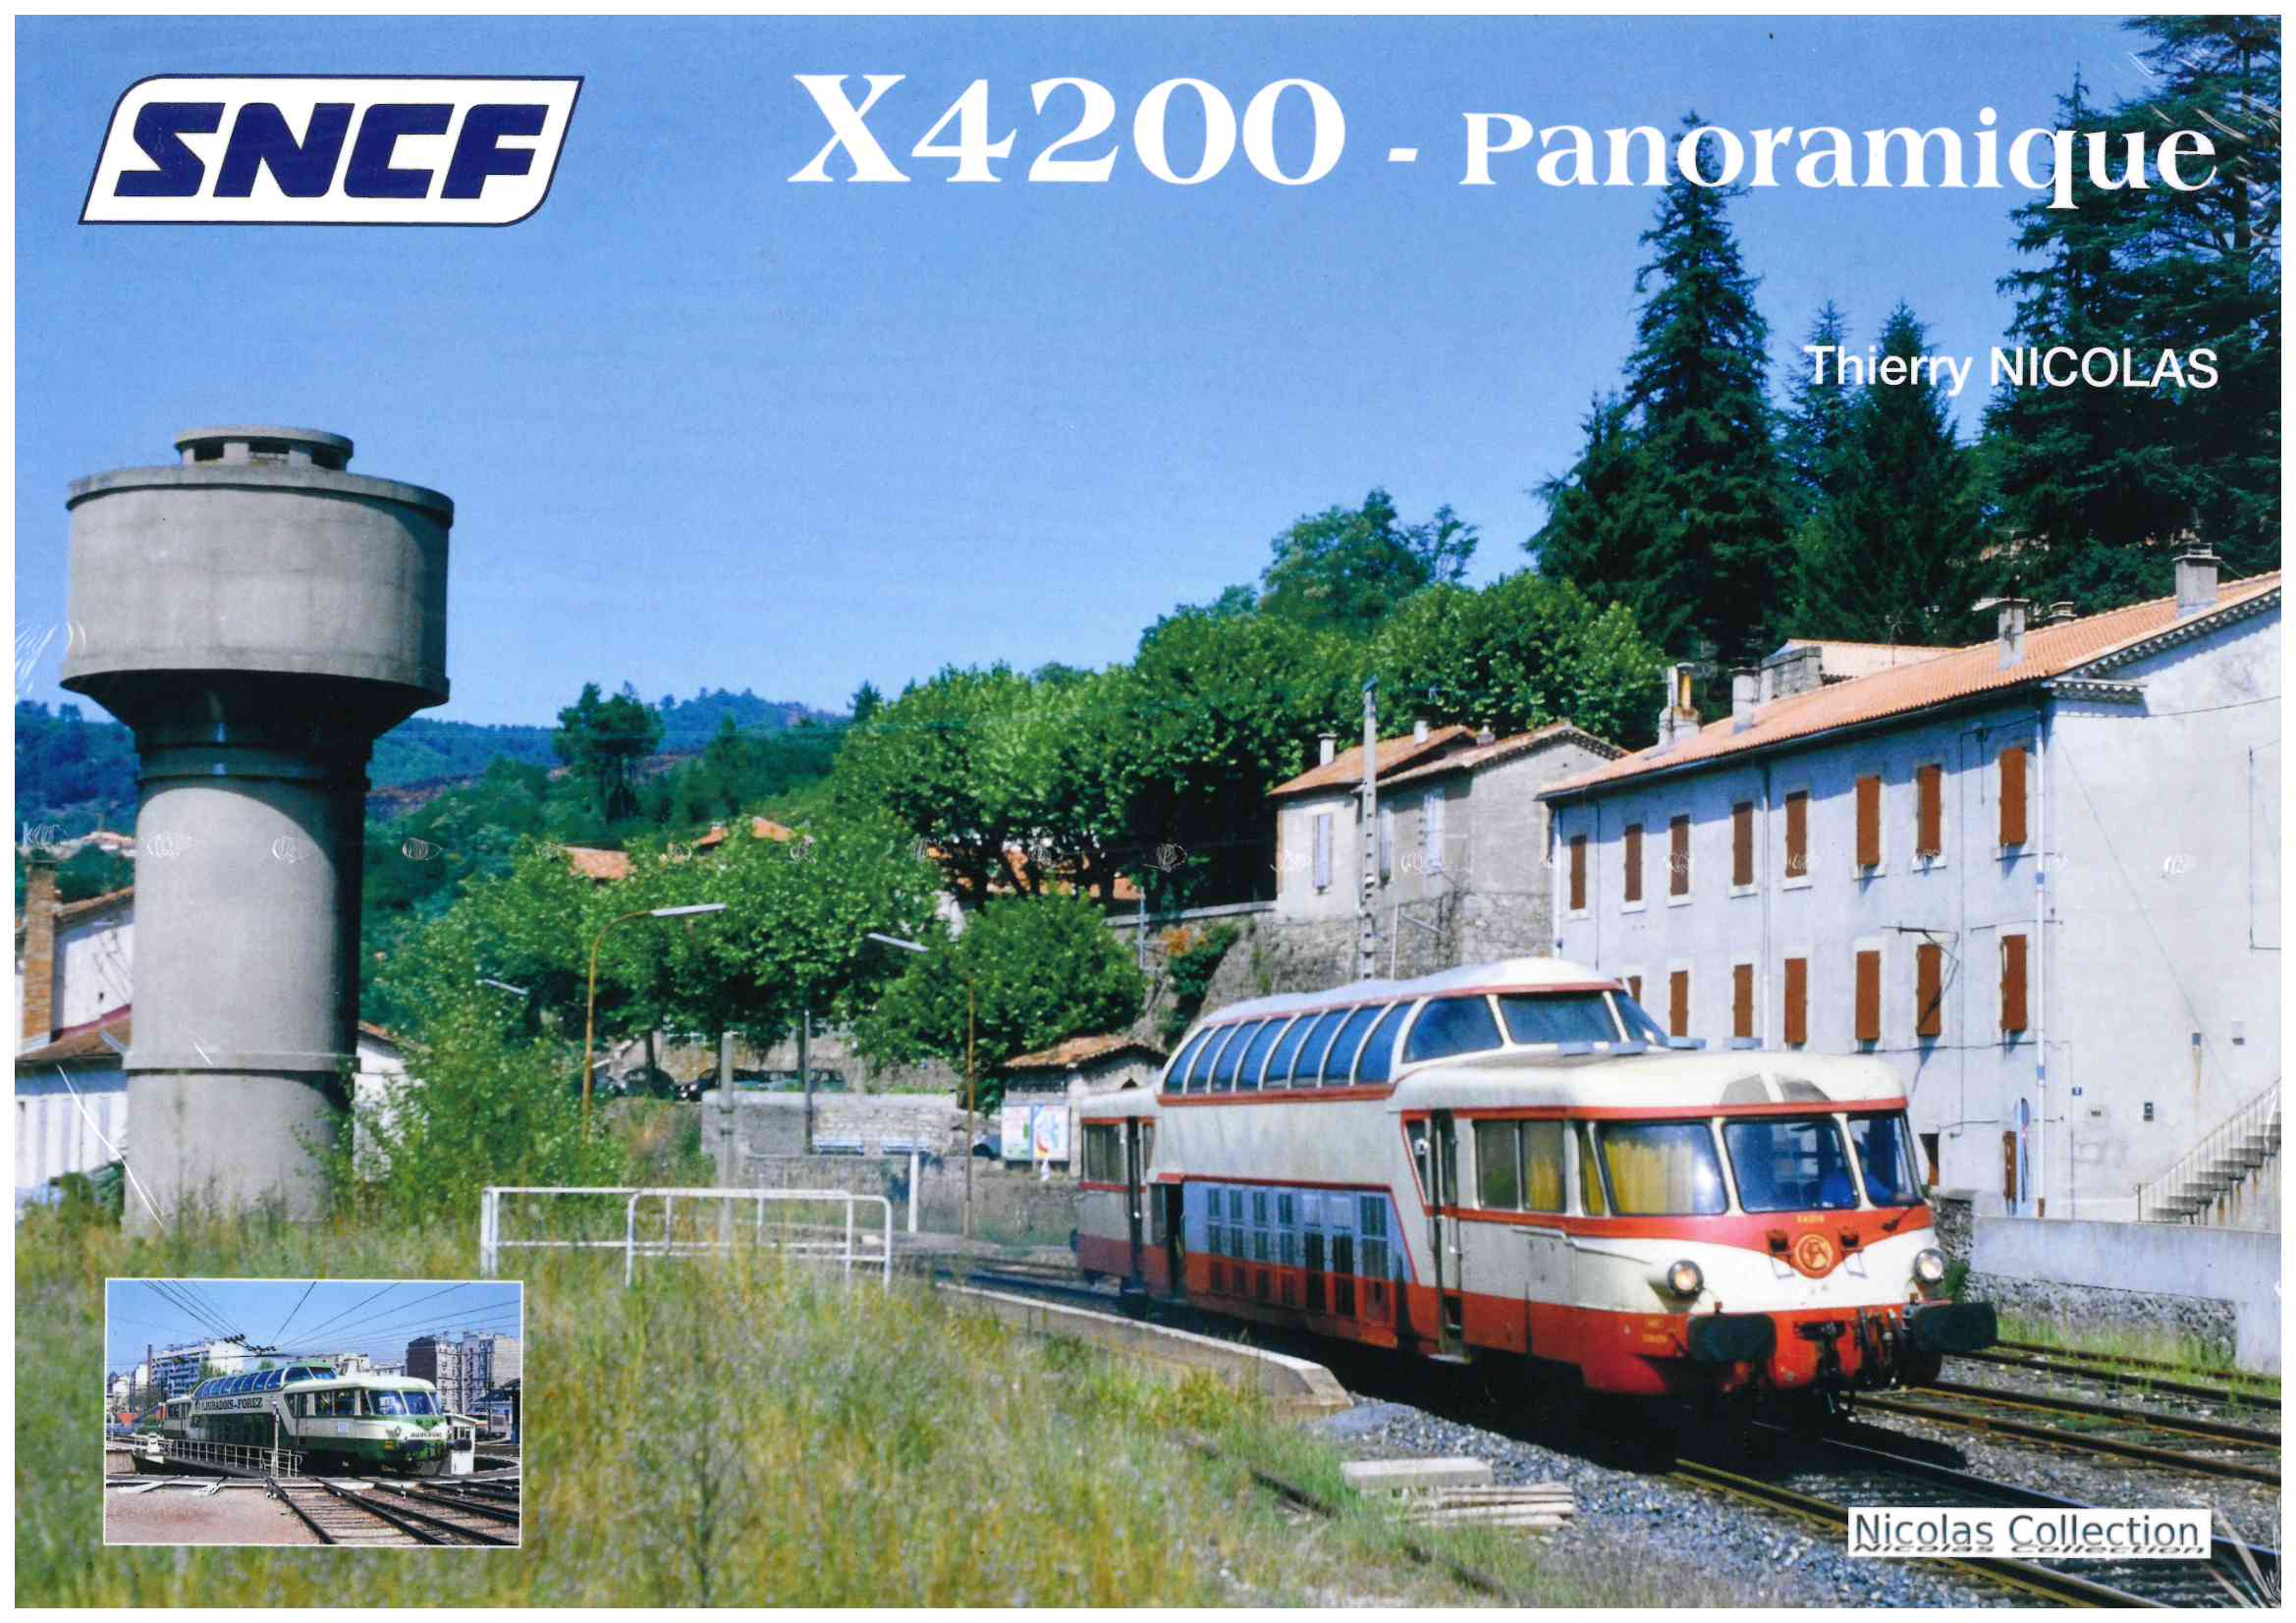 Buch SNCF X4200 Panoramique Thierry Nicolas Collection